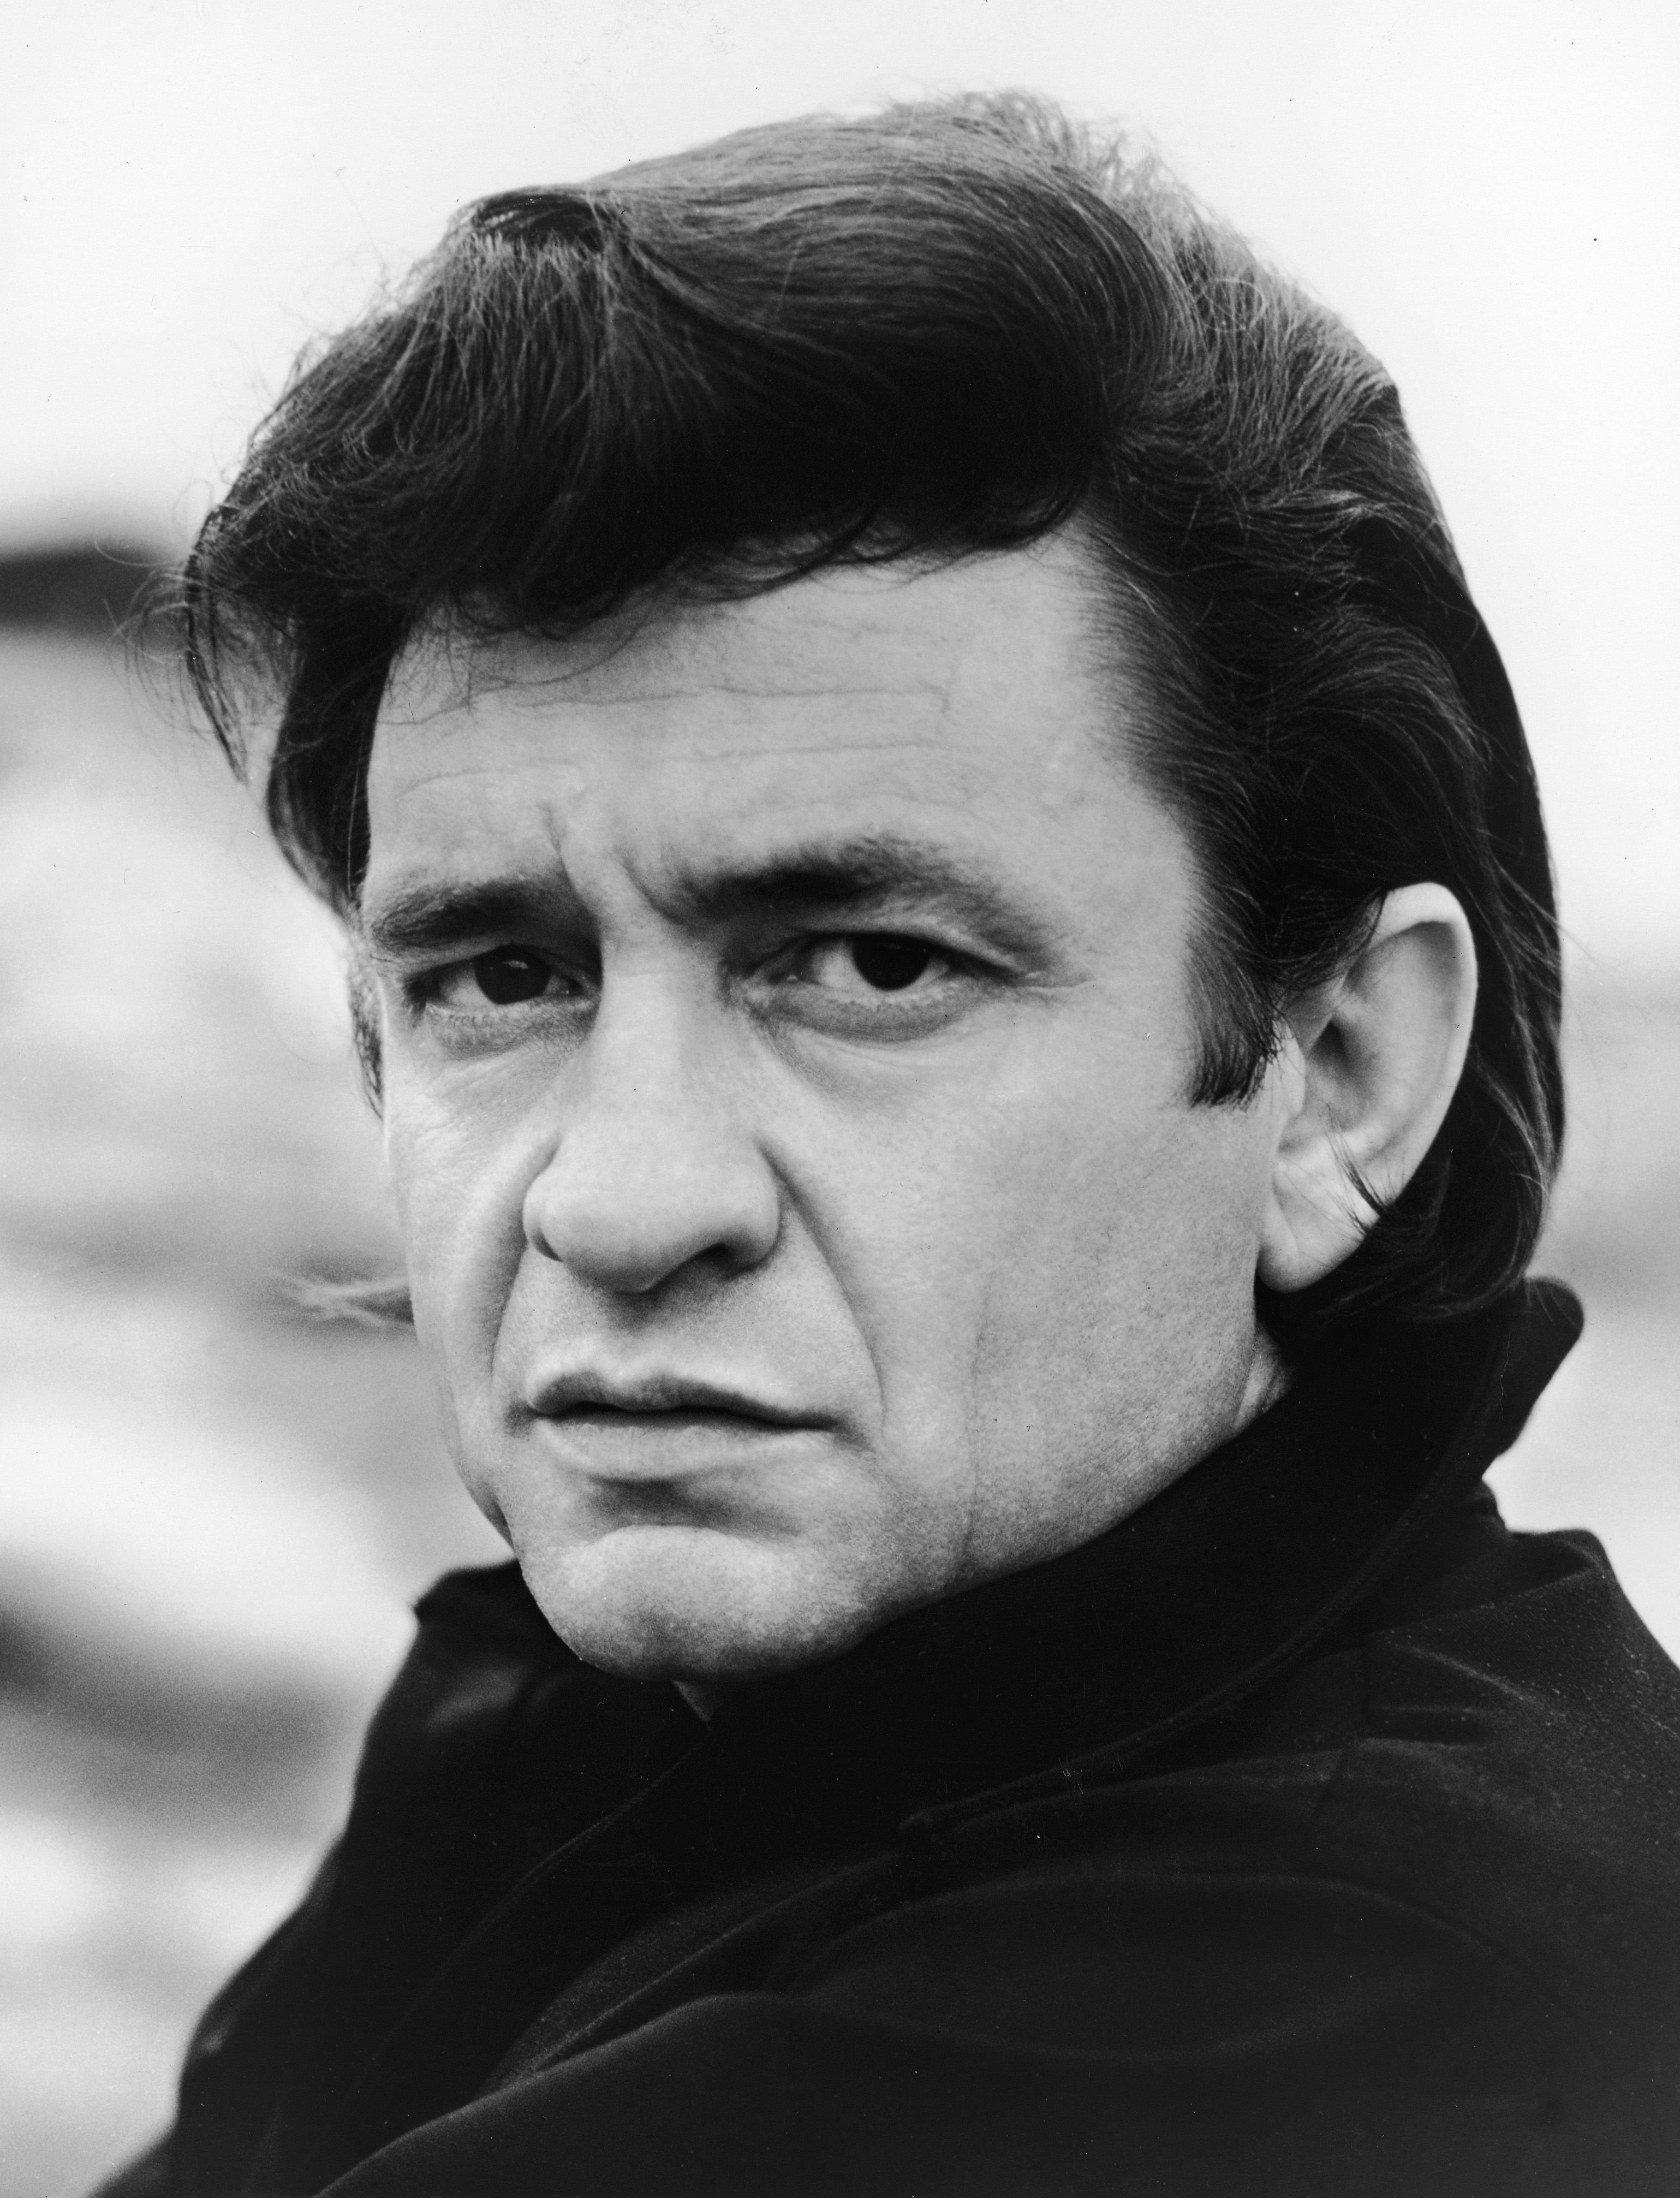  Country singer and songwriter Johnny Cash in 1969 | Source: Getty Images